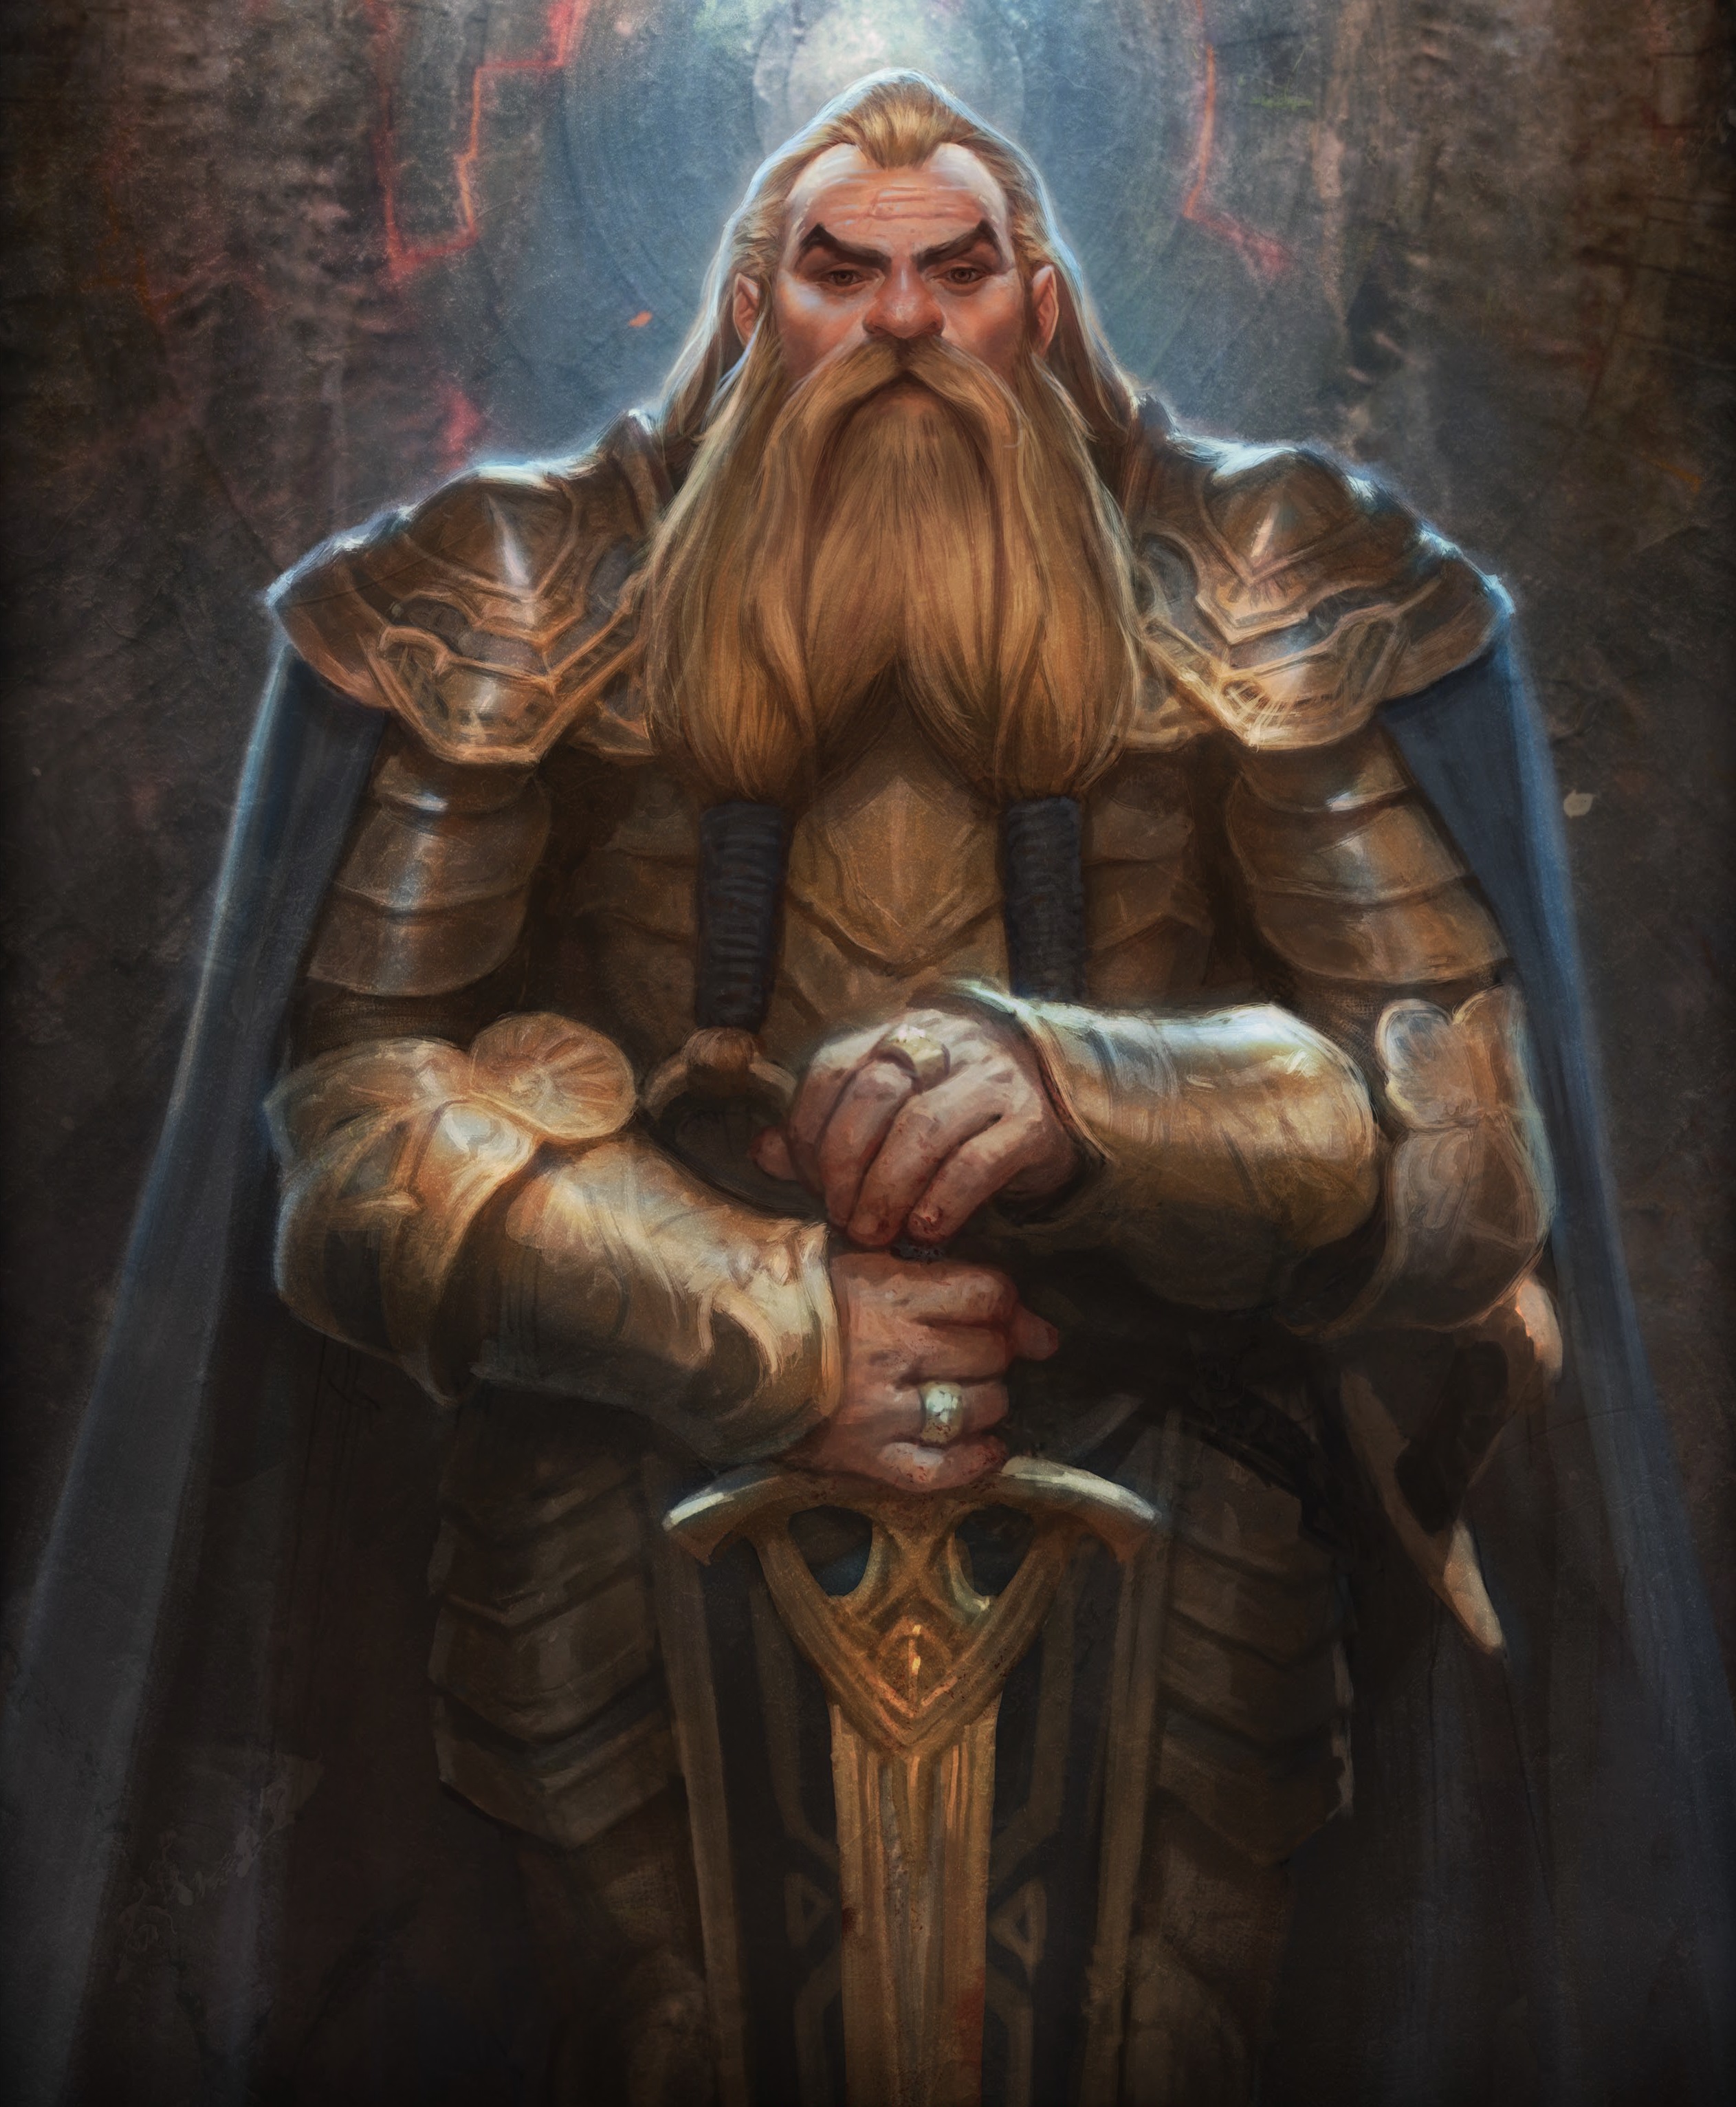 dao spoilers] Something I noticed in the Dwarf Noble origin : r